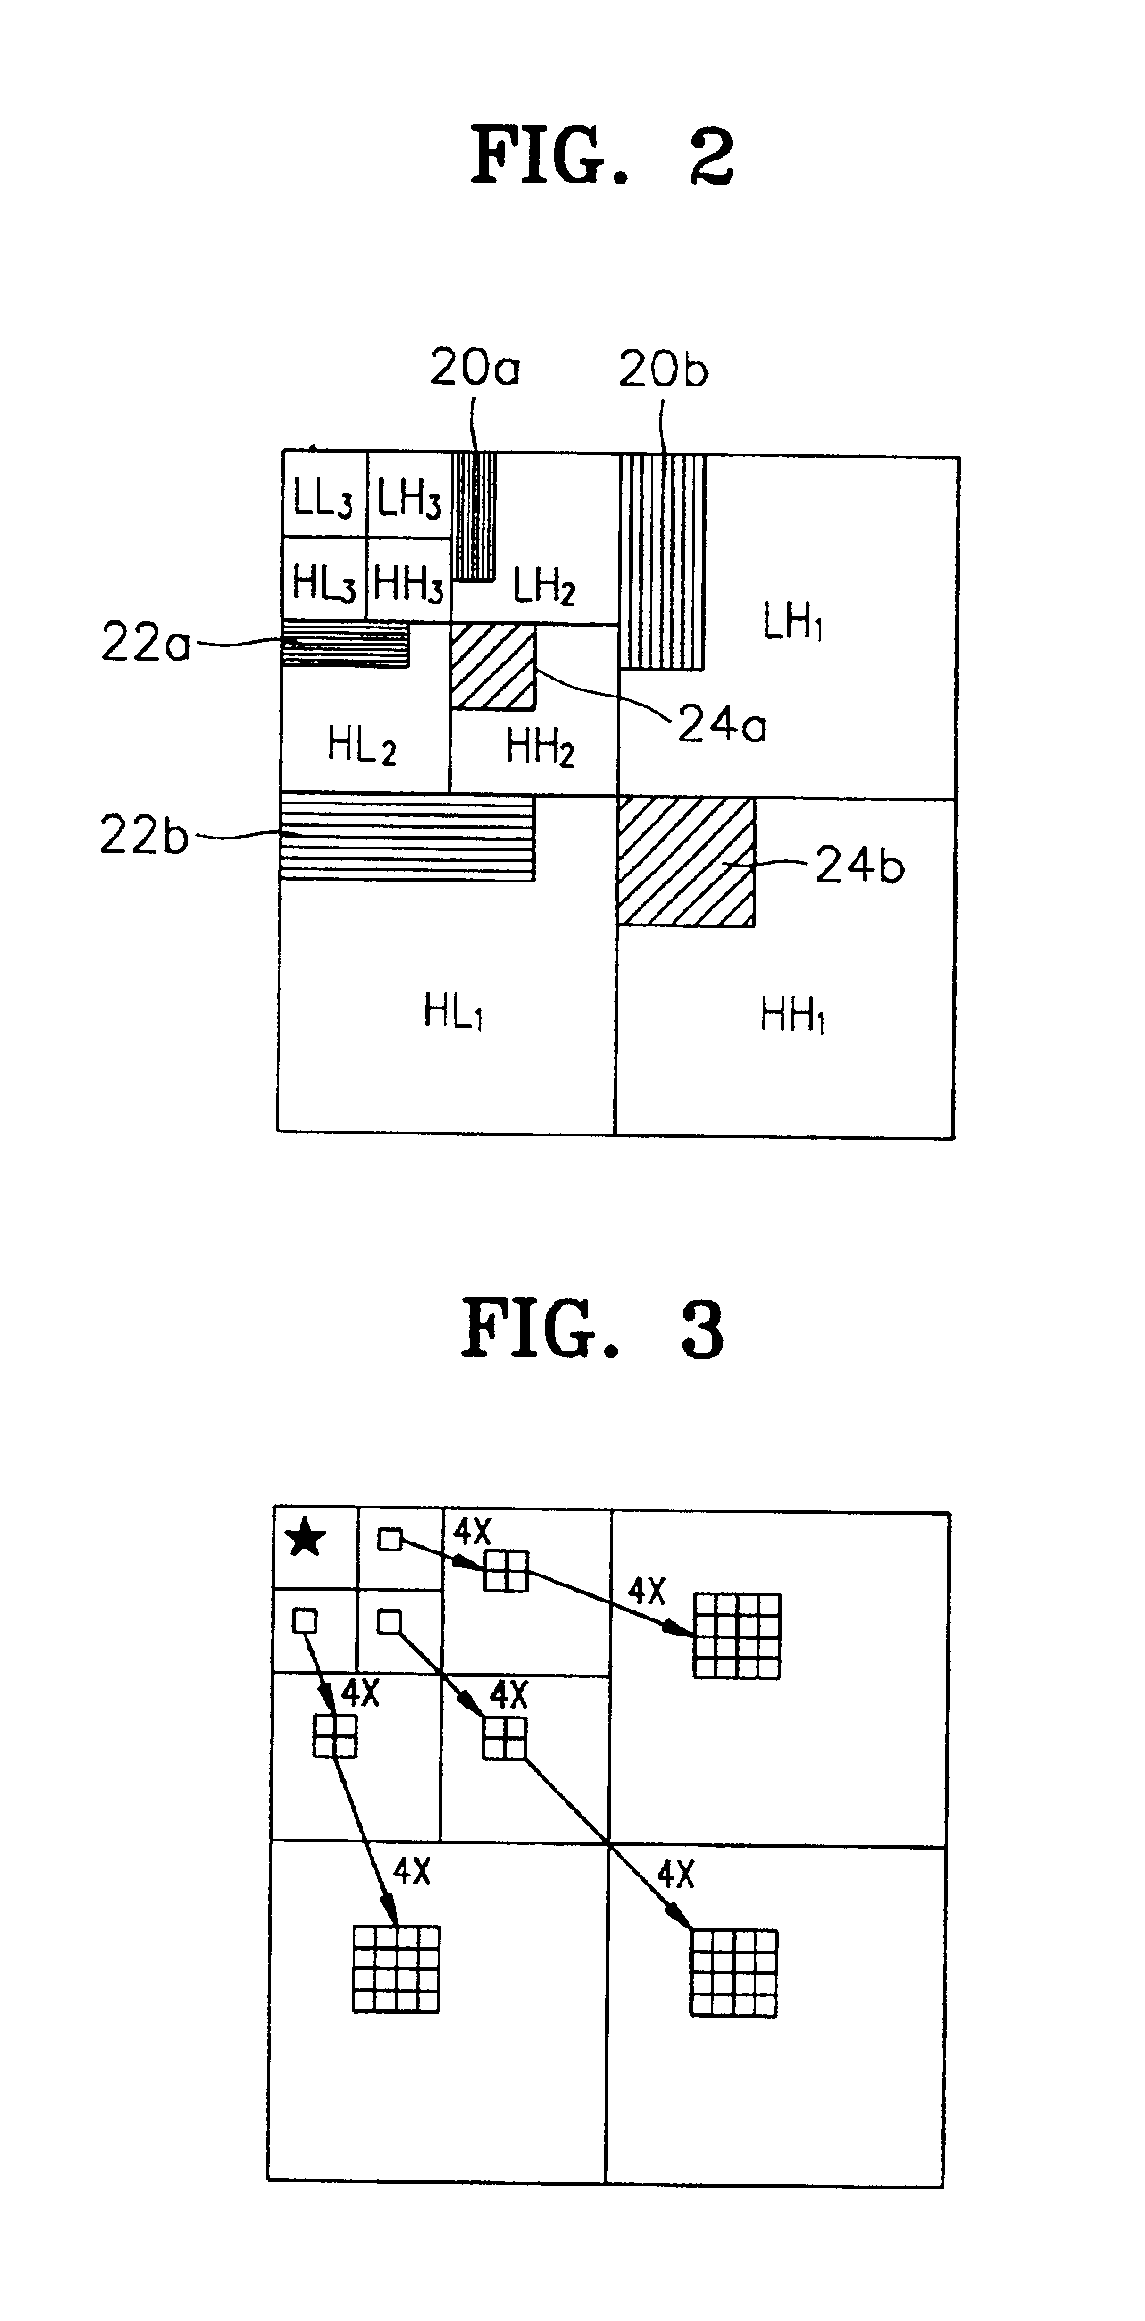 Apparatus and method for image coding using tree-structured quantization based on wavelet transform